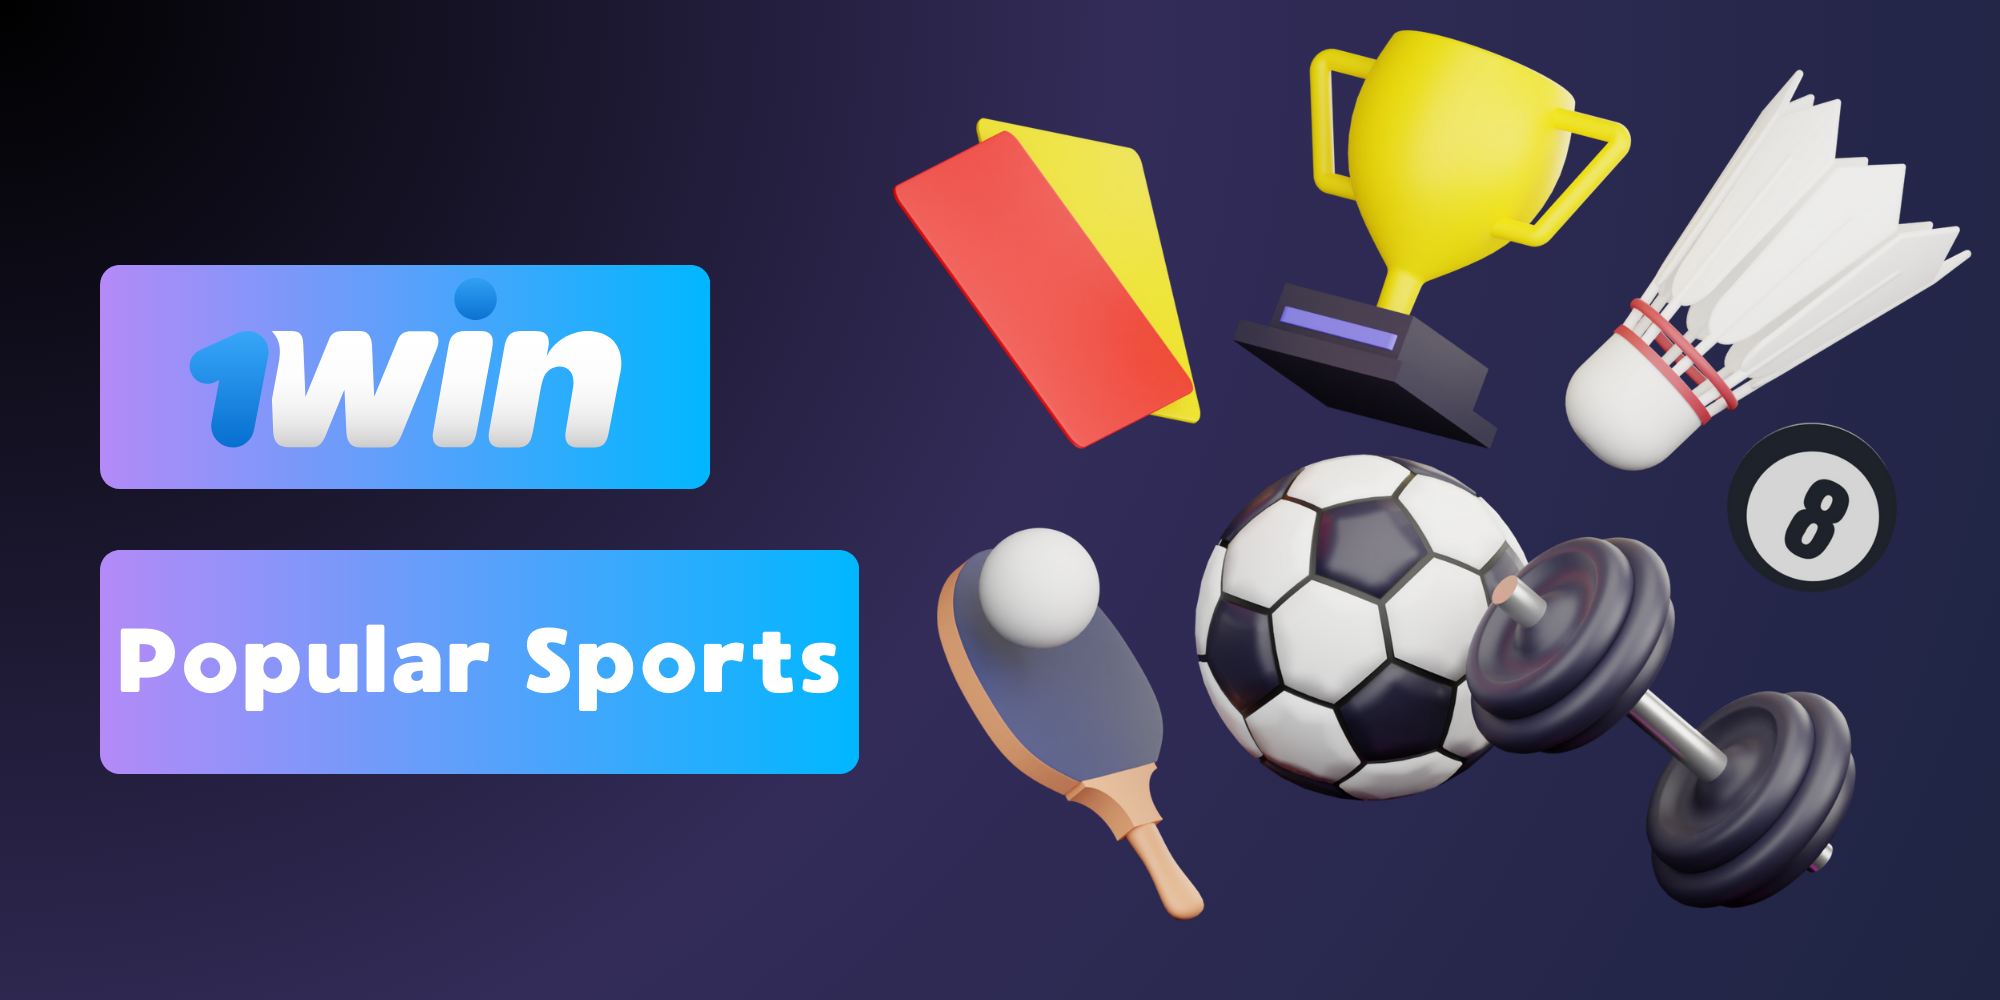 1win in India provides access to a large number of sports events for online betting